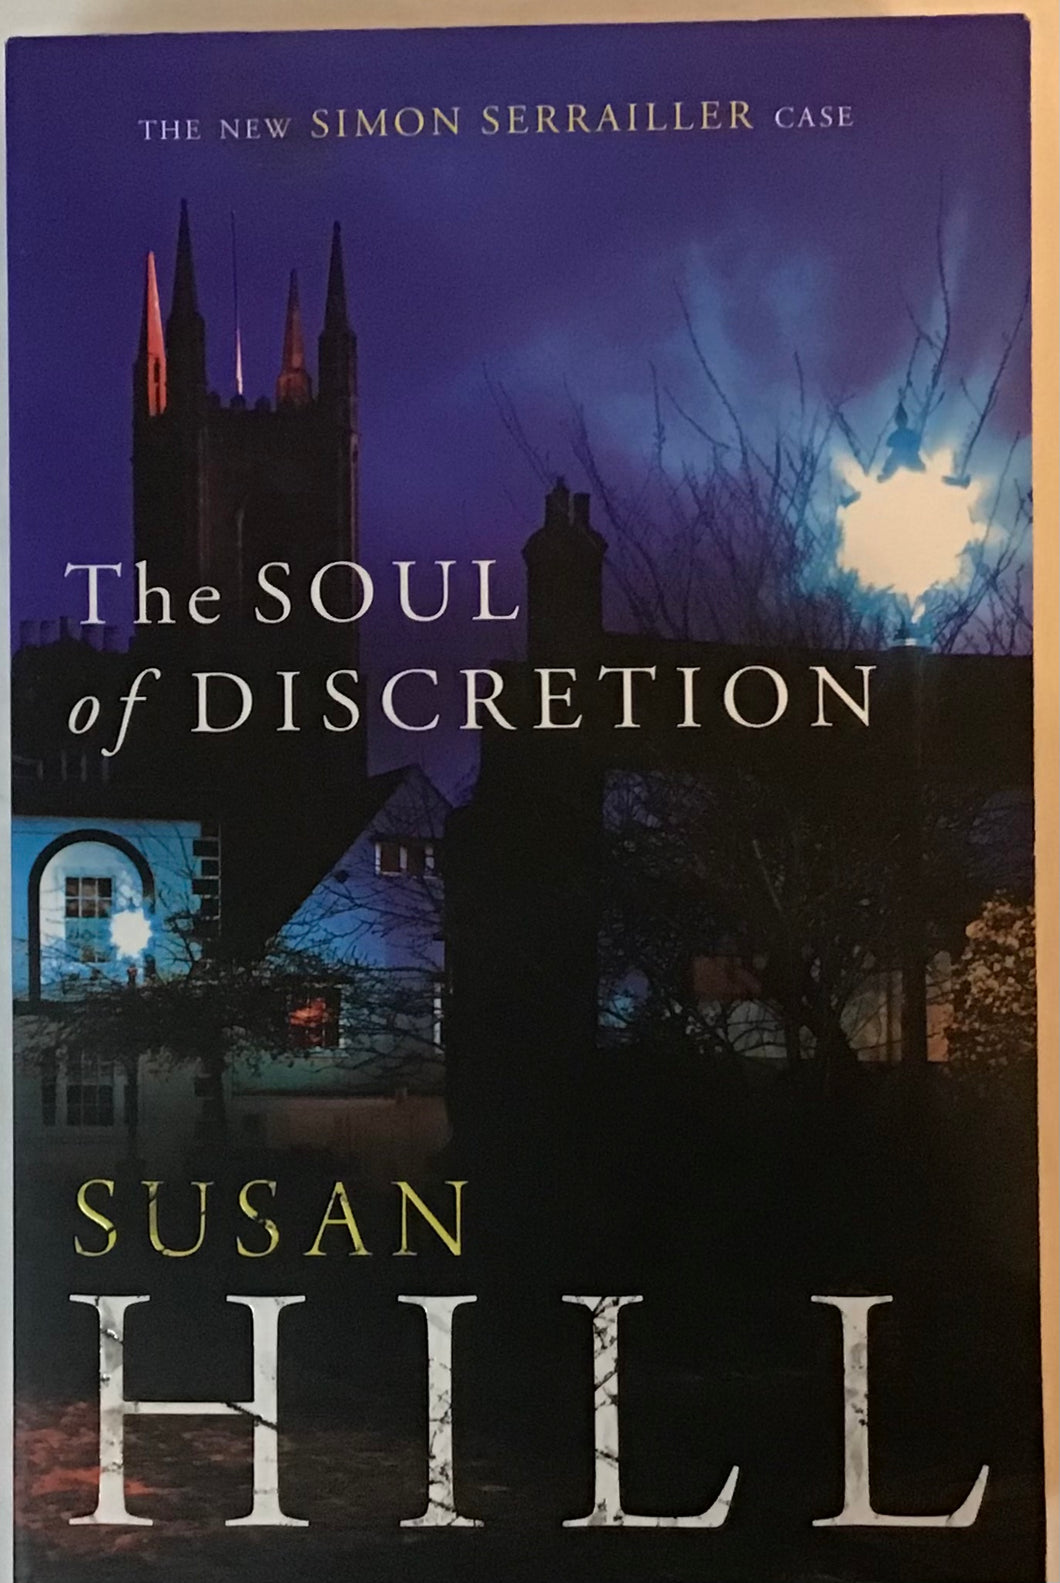 The Soul of Discretion, Susan Hill